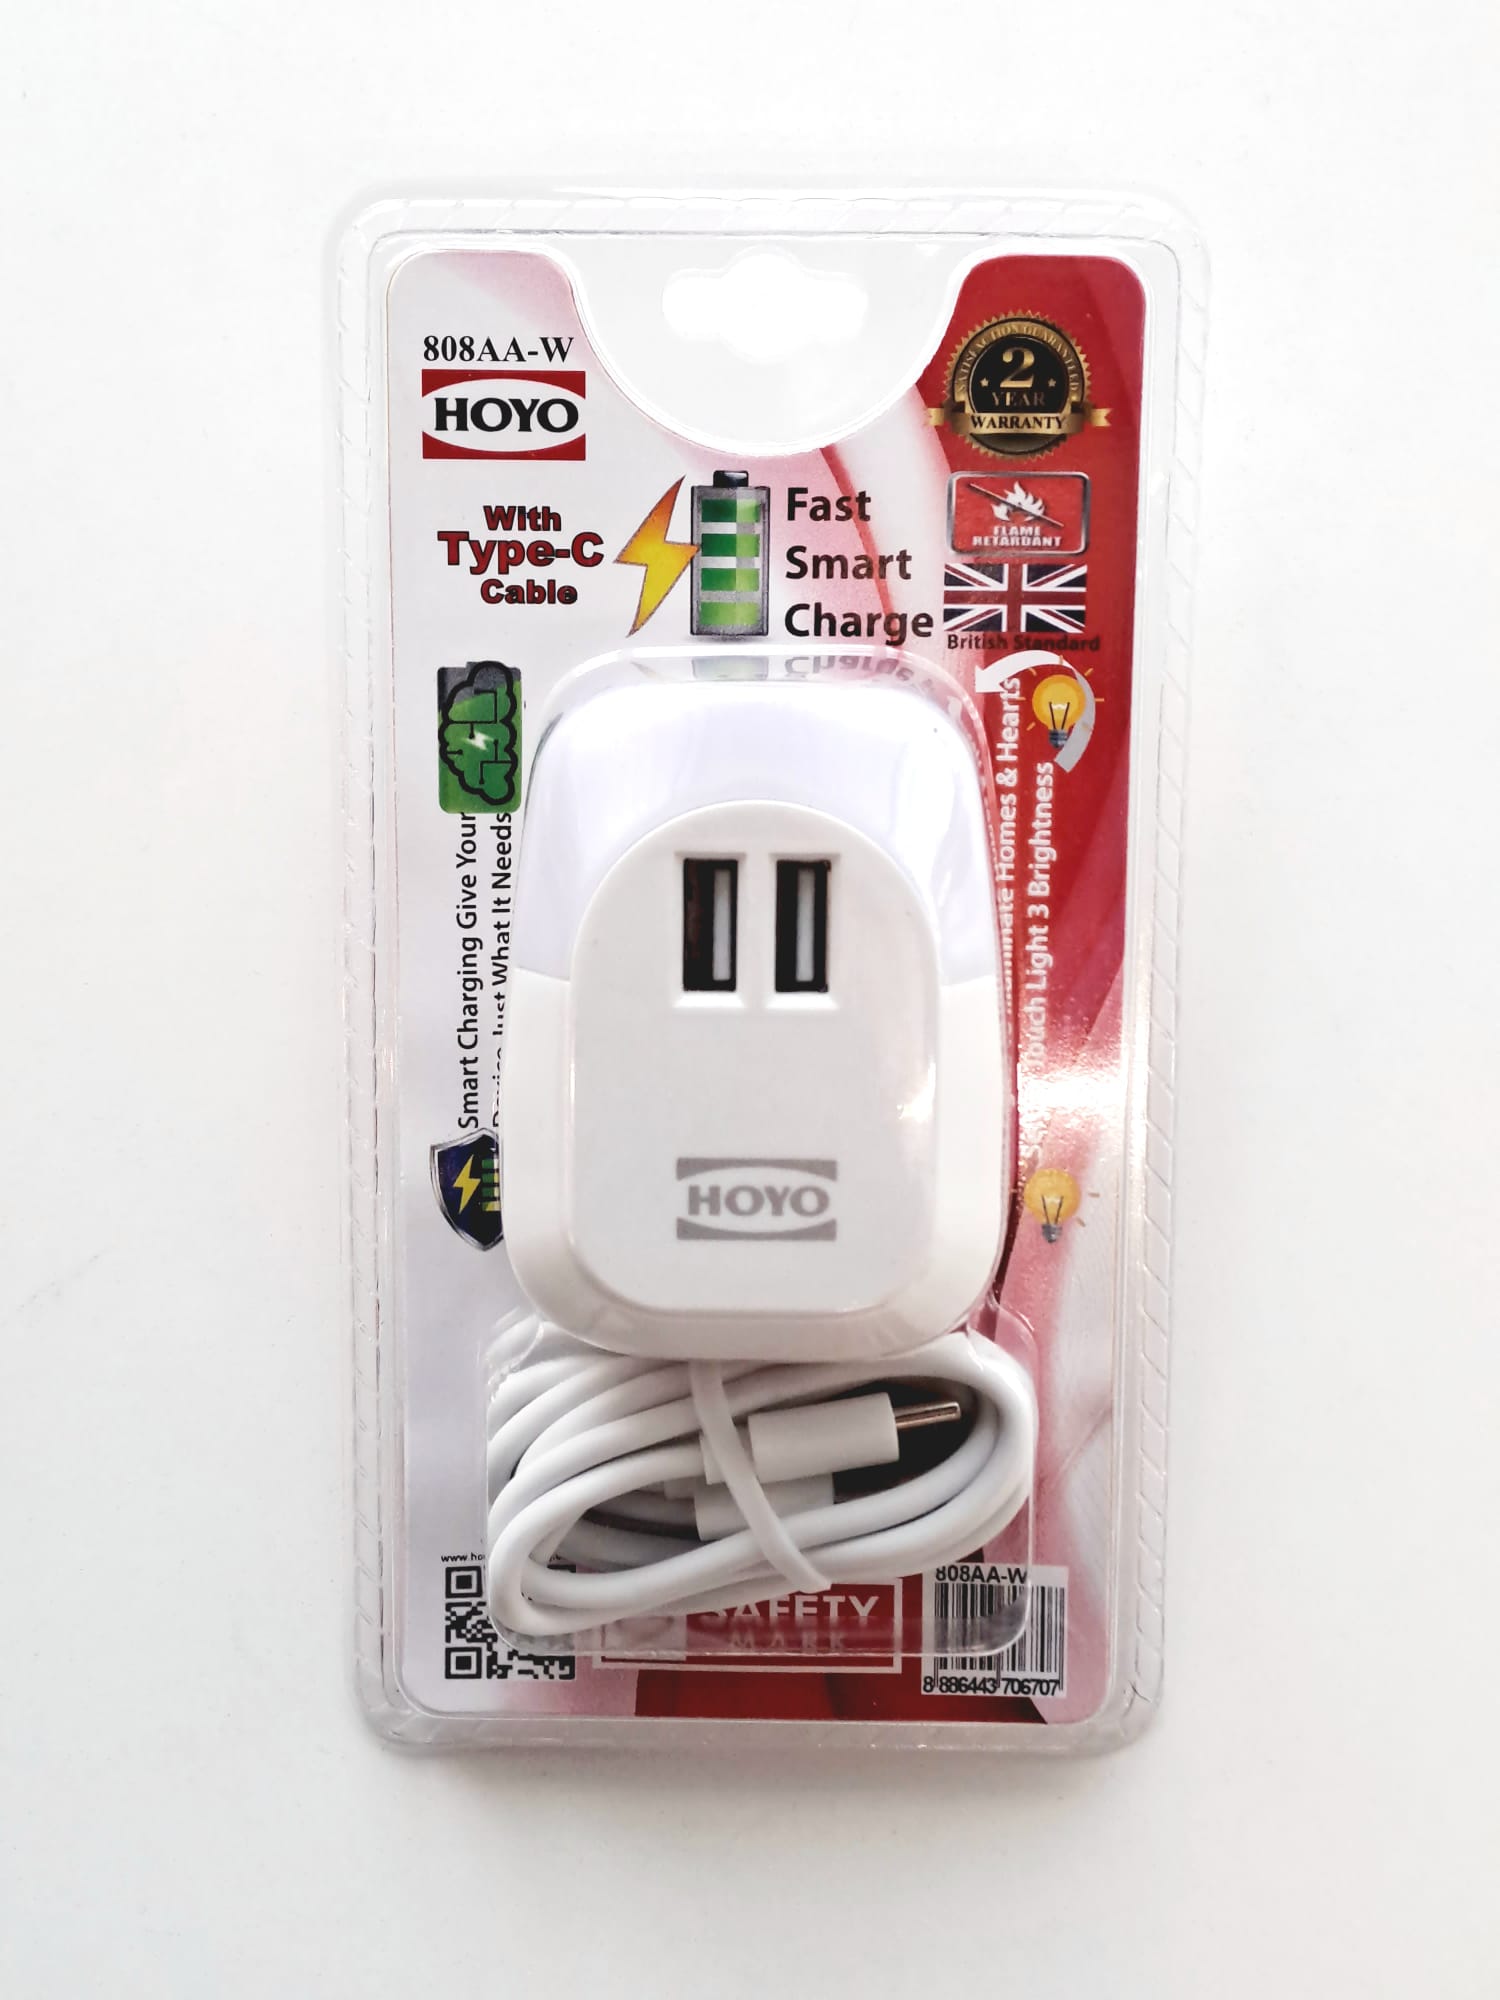 Hoyo 2 USB Ports Charger with White Night Light (Type C cable included)